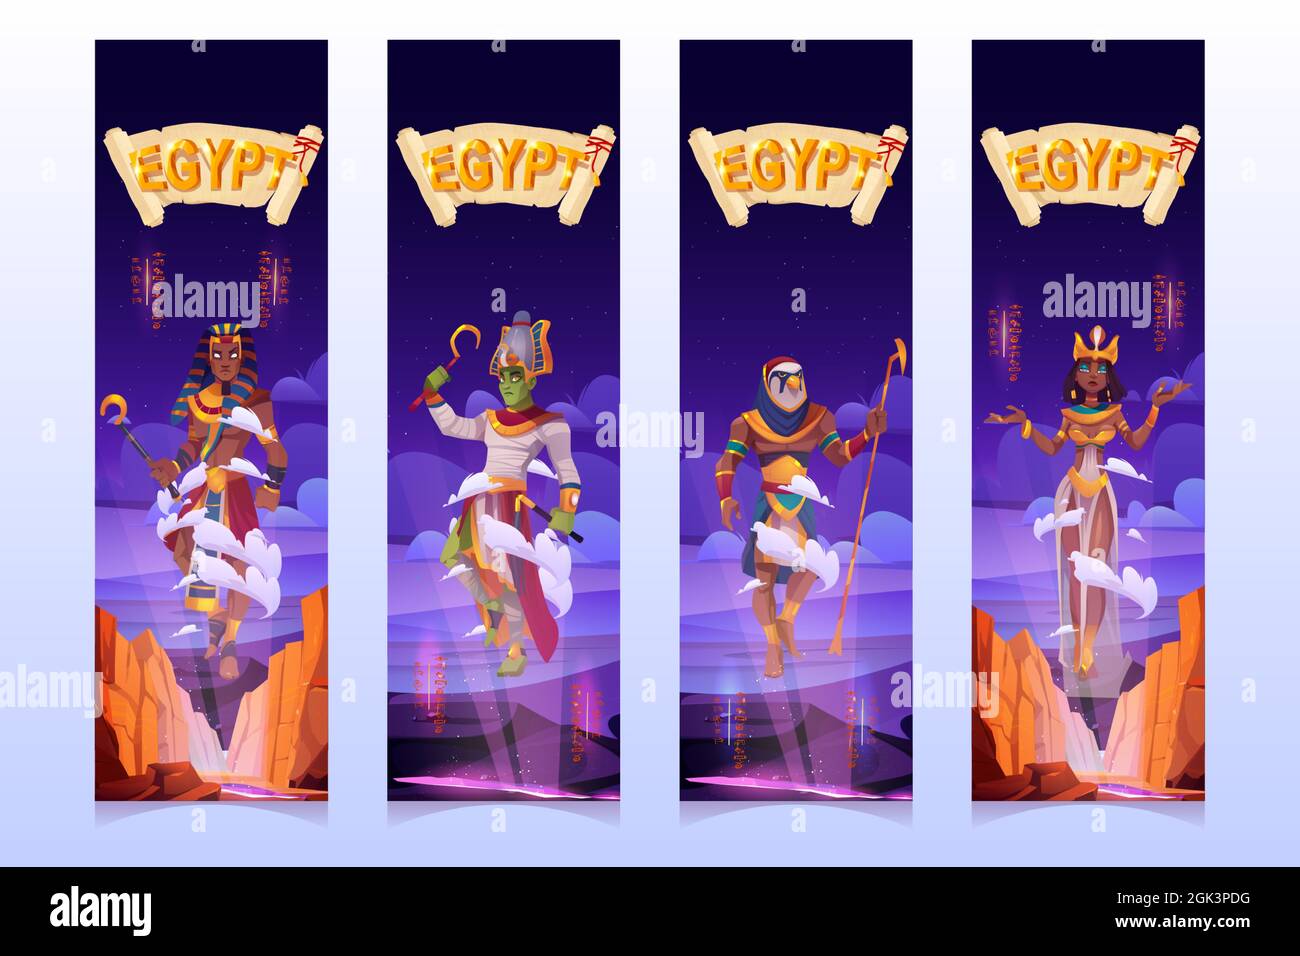 Egyptian gods cartoon vertical banners, Amun Ra, Horus, Pharaoh and queen Cleopatra ancient Egypt deities in royal clothes holding divine power staffs floating in air above rocks, vector illustration Stock Vector